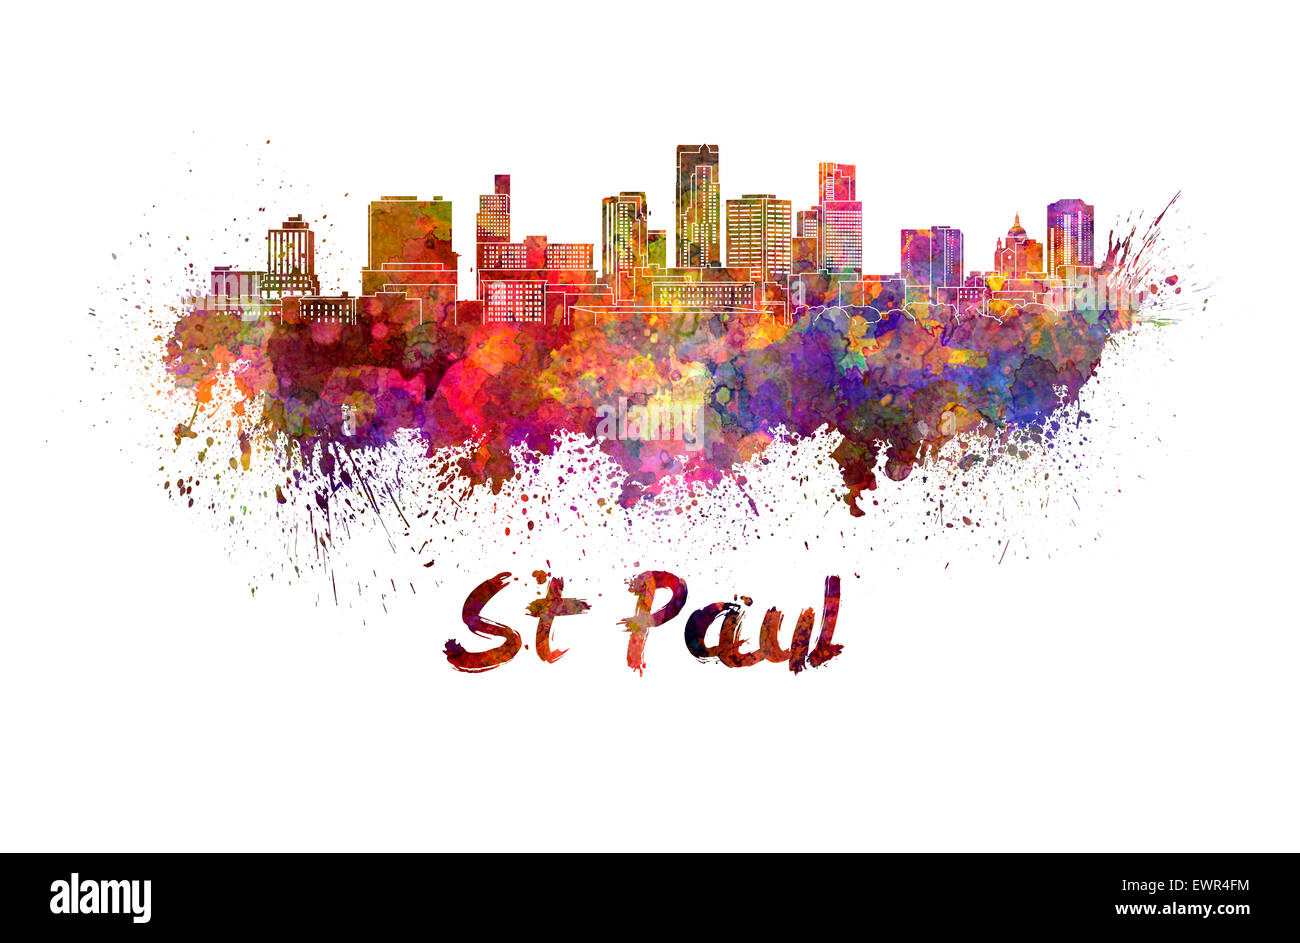 St Paul skyline in watercolor splatters with clipping path Stock Photo